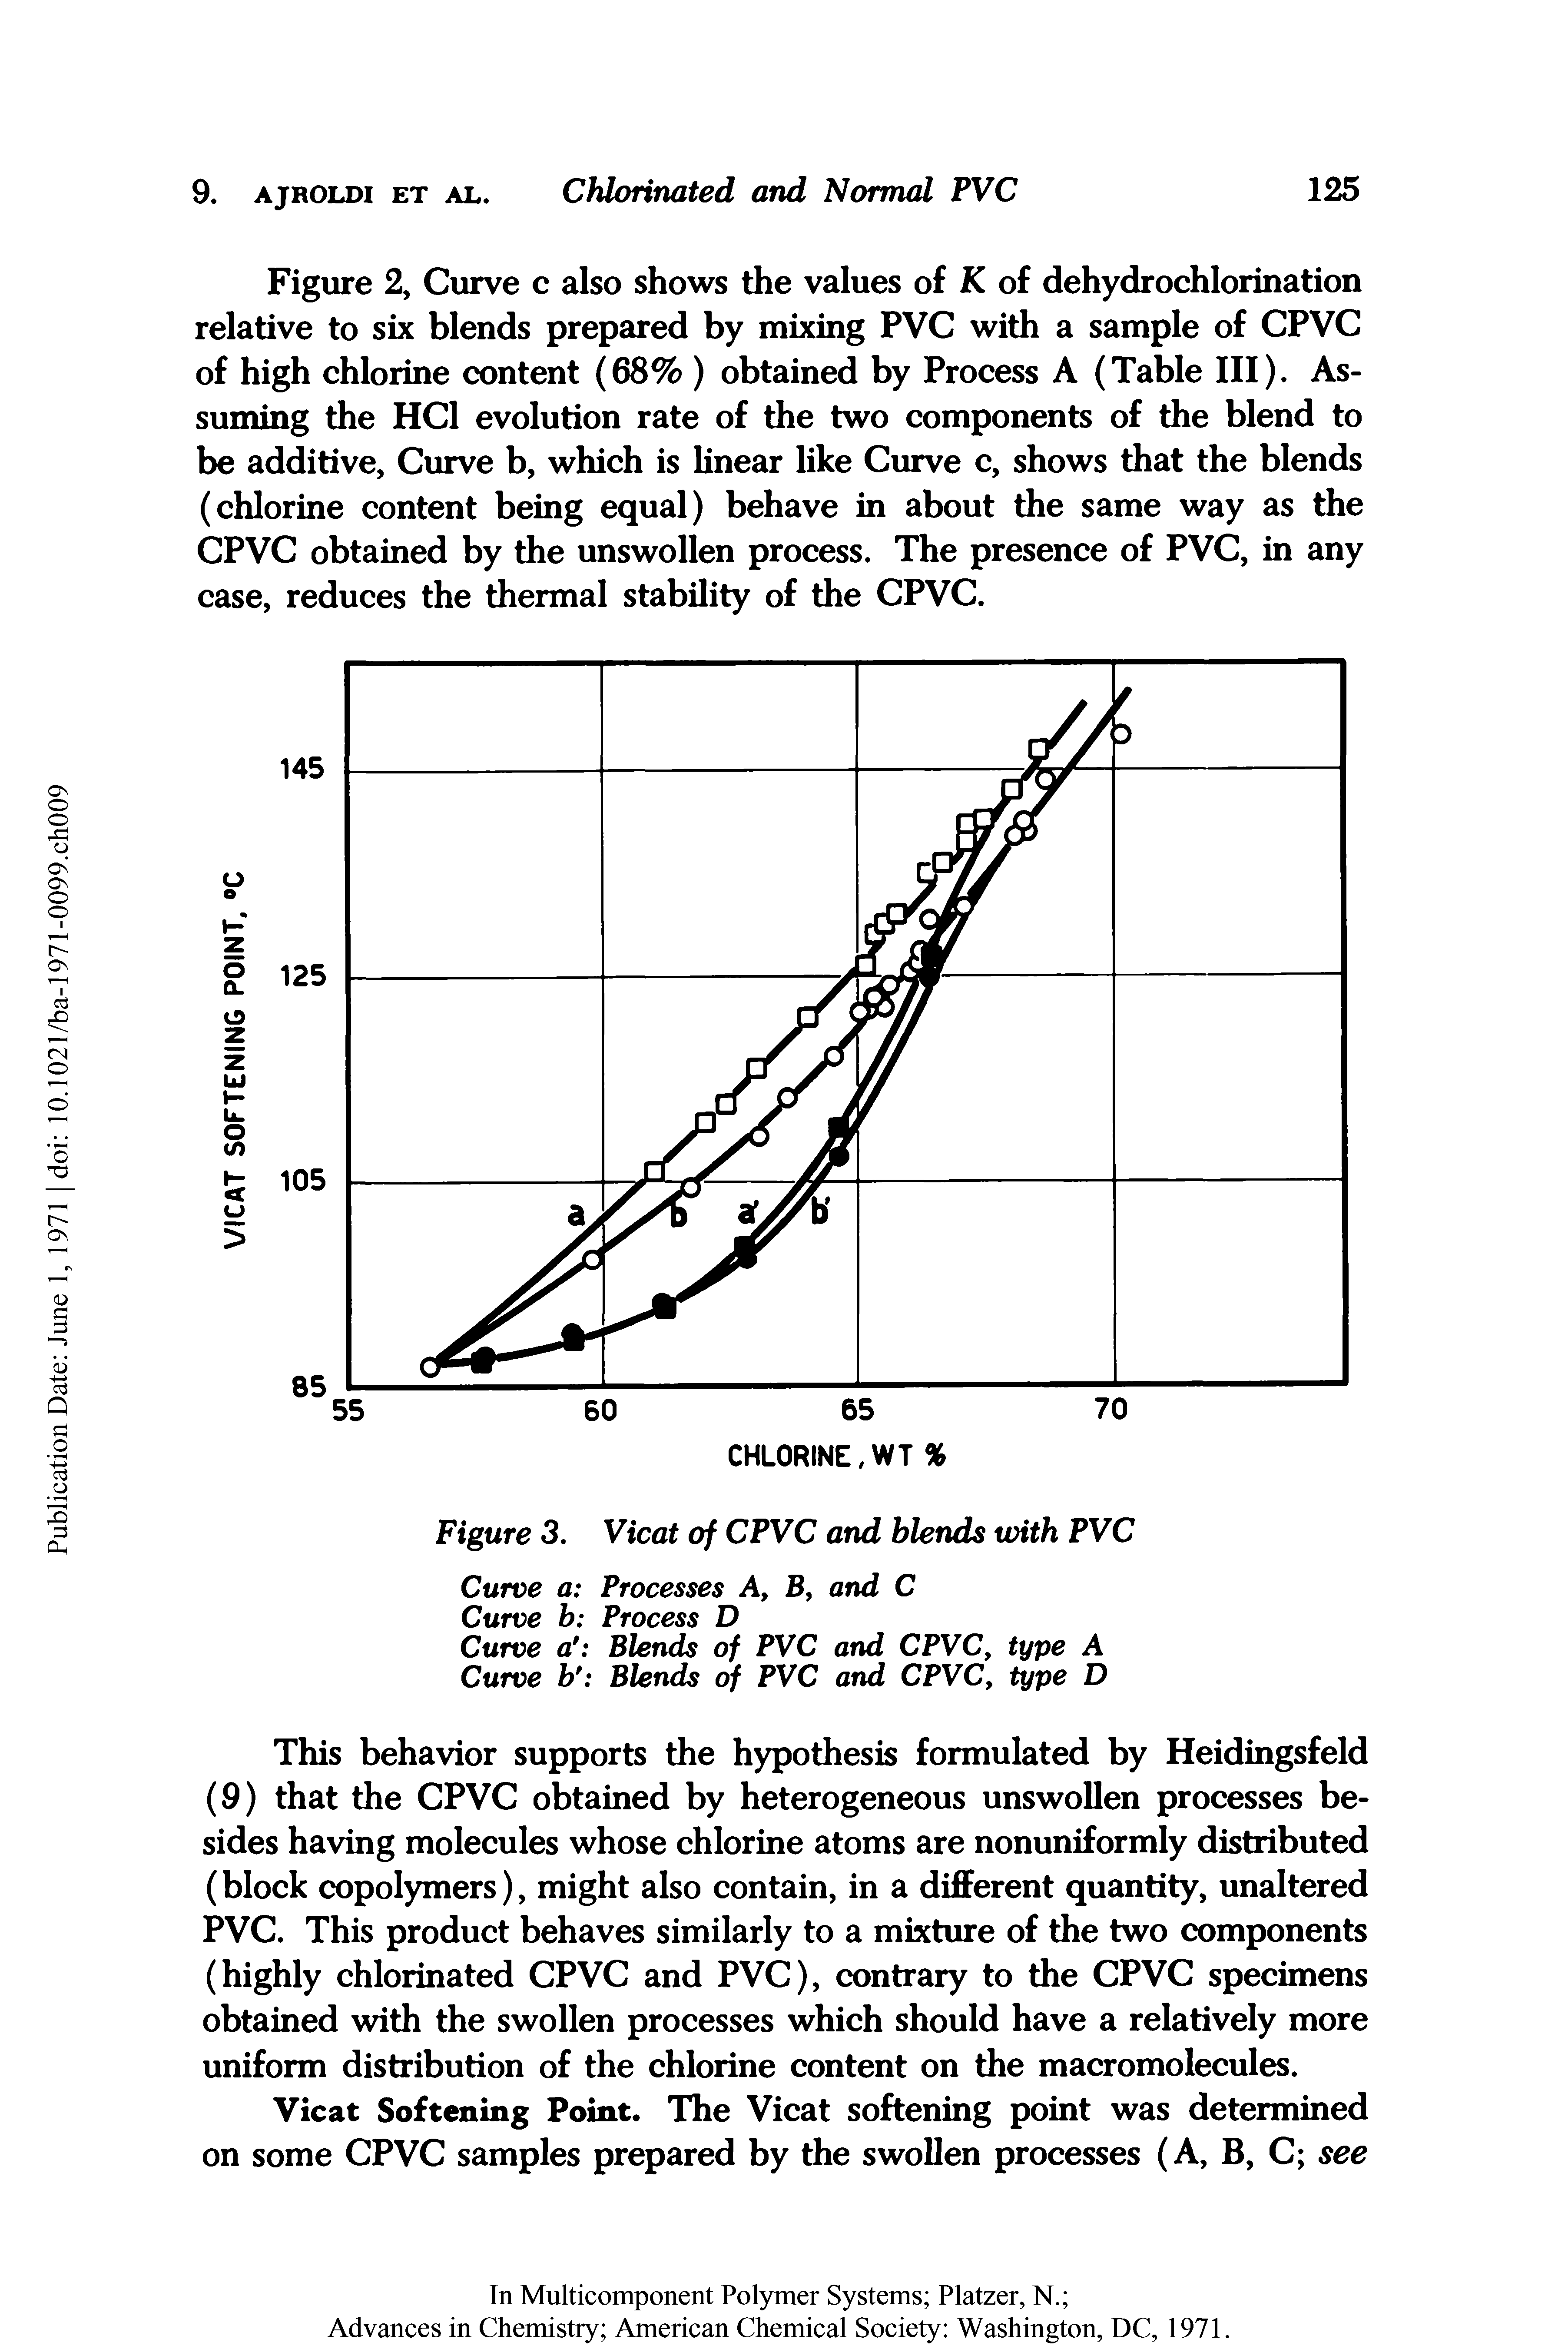 Figure 2, Curve c also shows the values of K of dehydrochlorination relative to six blends prepared by mixing PVC with a sample of CPVC of high chlorine content (68% ) obtained by Process A (Table III). Assuming the HC1 evolution rate of the two components of the blend to be additive, Curve b, which is linear like Curve c, shows that the blends (chlorine content being equal) behave in about the same way as the CPVC obtained by the unswollen process. The presence of PVC, in any case, reduces the thermal stability of the CPVC.